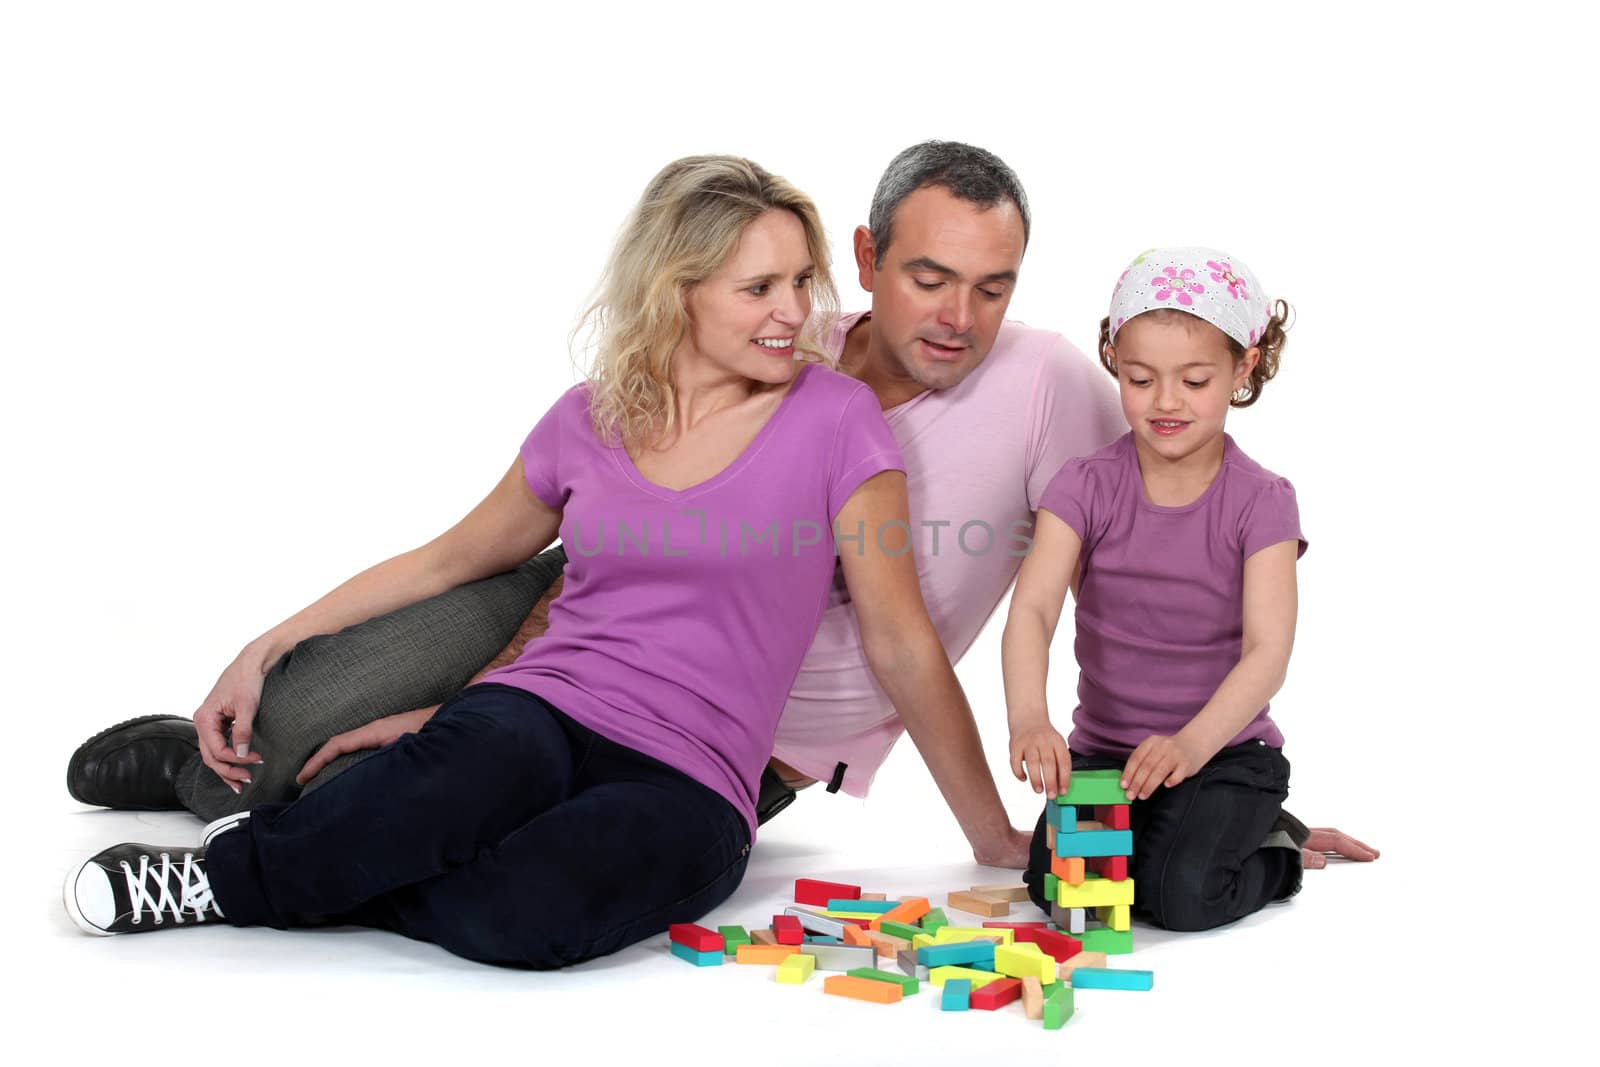 Parents watching their daughter play with blocks by phovoir